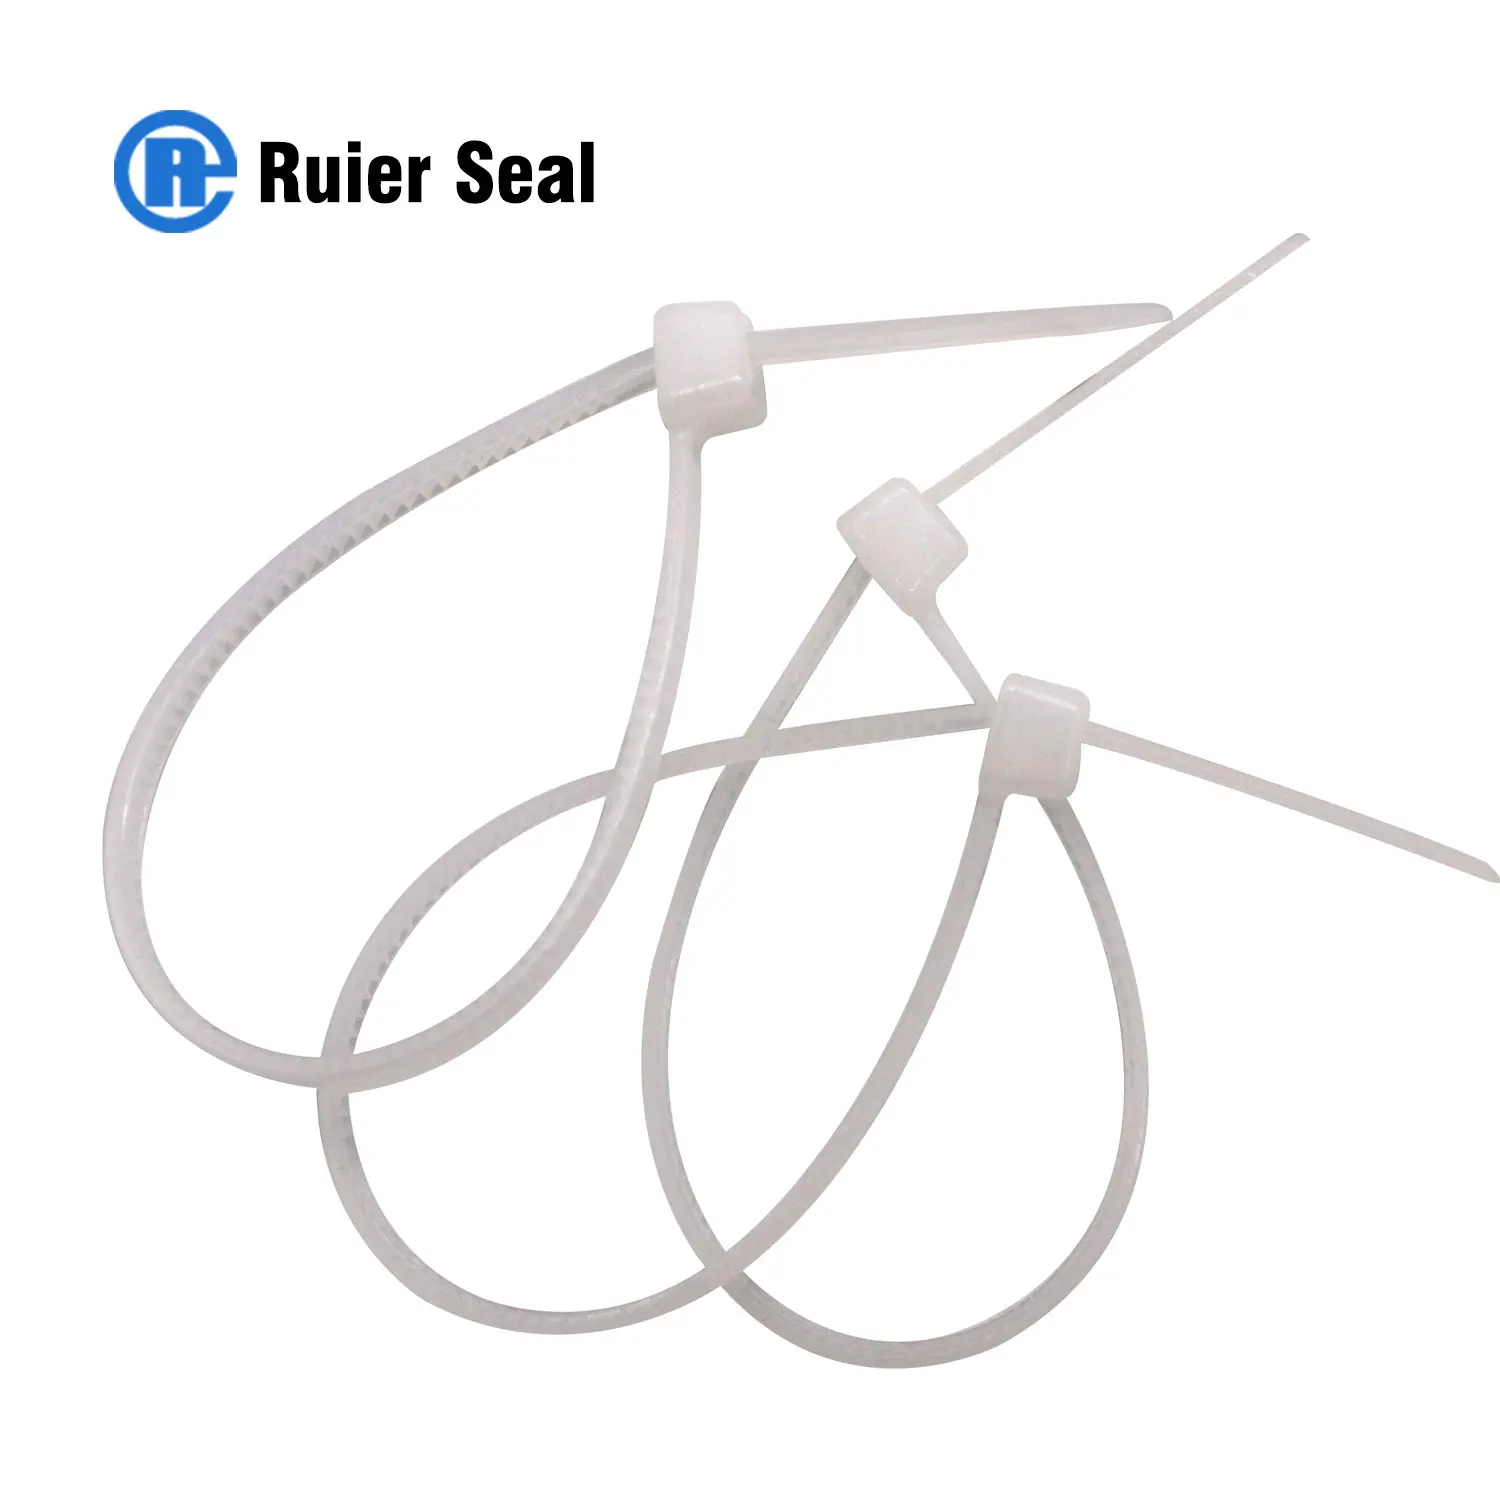 RECT109 Good Reputation High Quality Nylon Cable Tie With Label